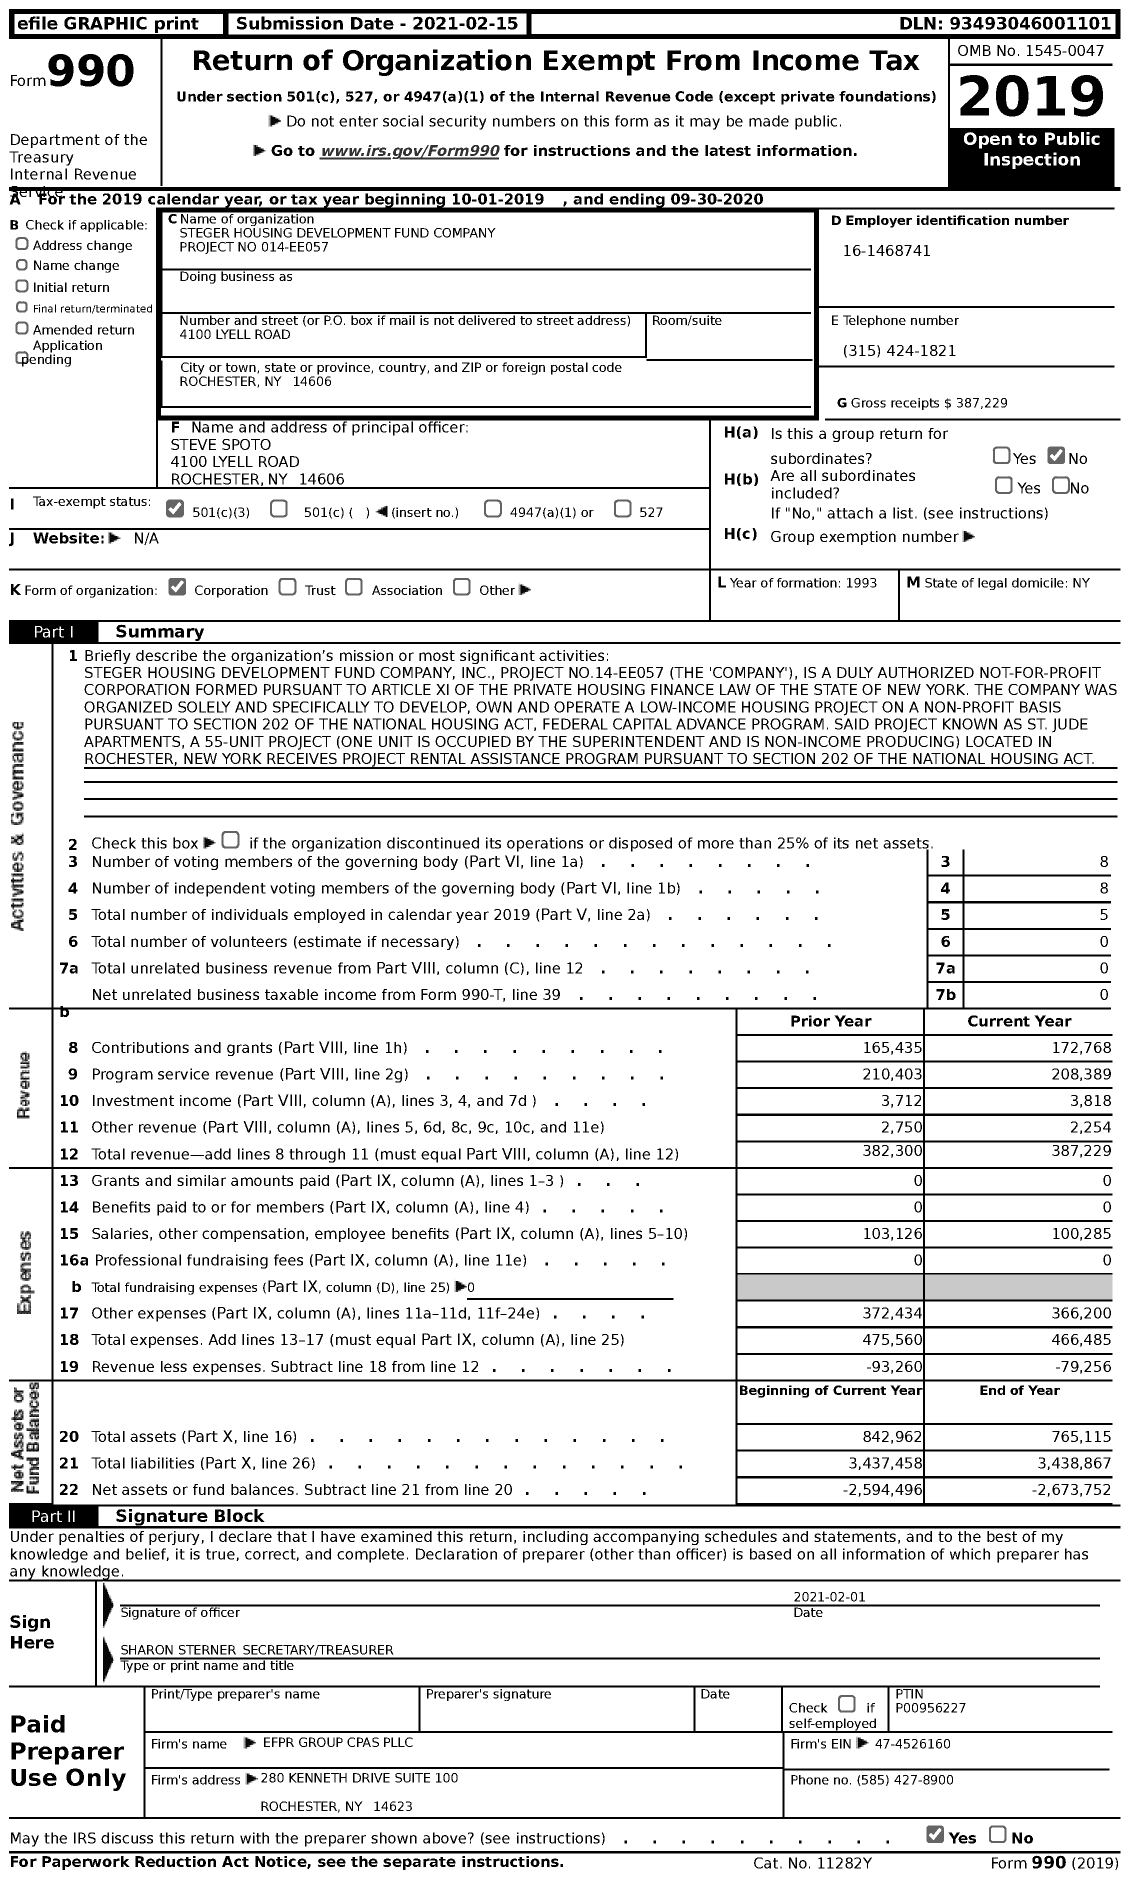 Image of first page of 2019 Form 990 for Steger Housing Development Fund Company Project No 014-ee057